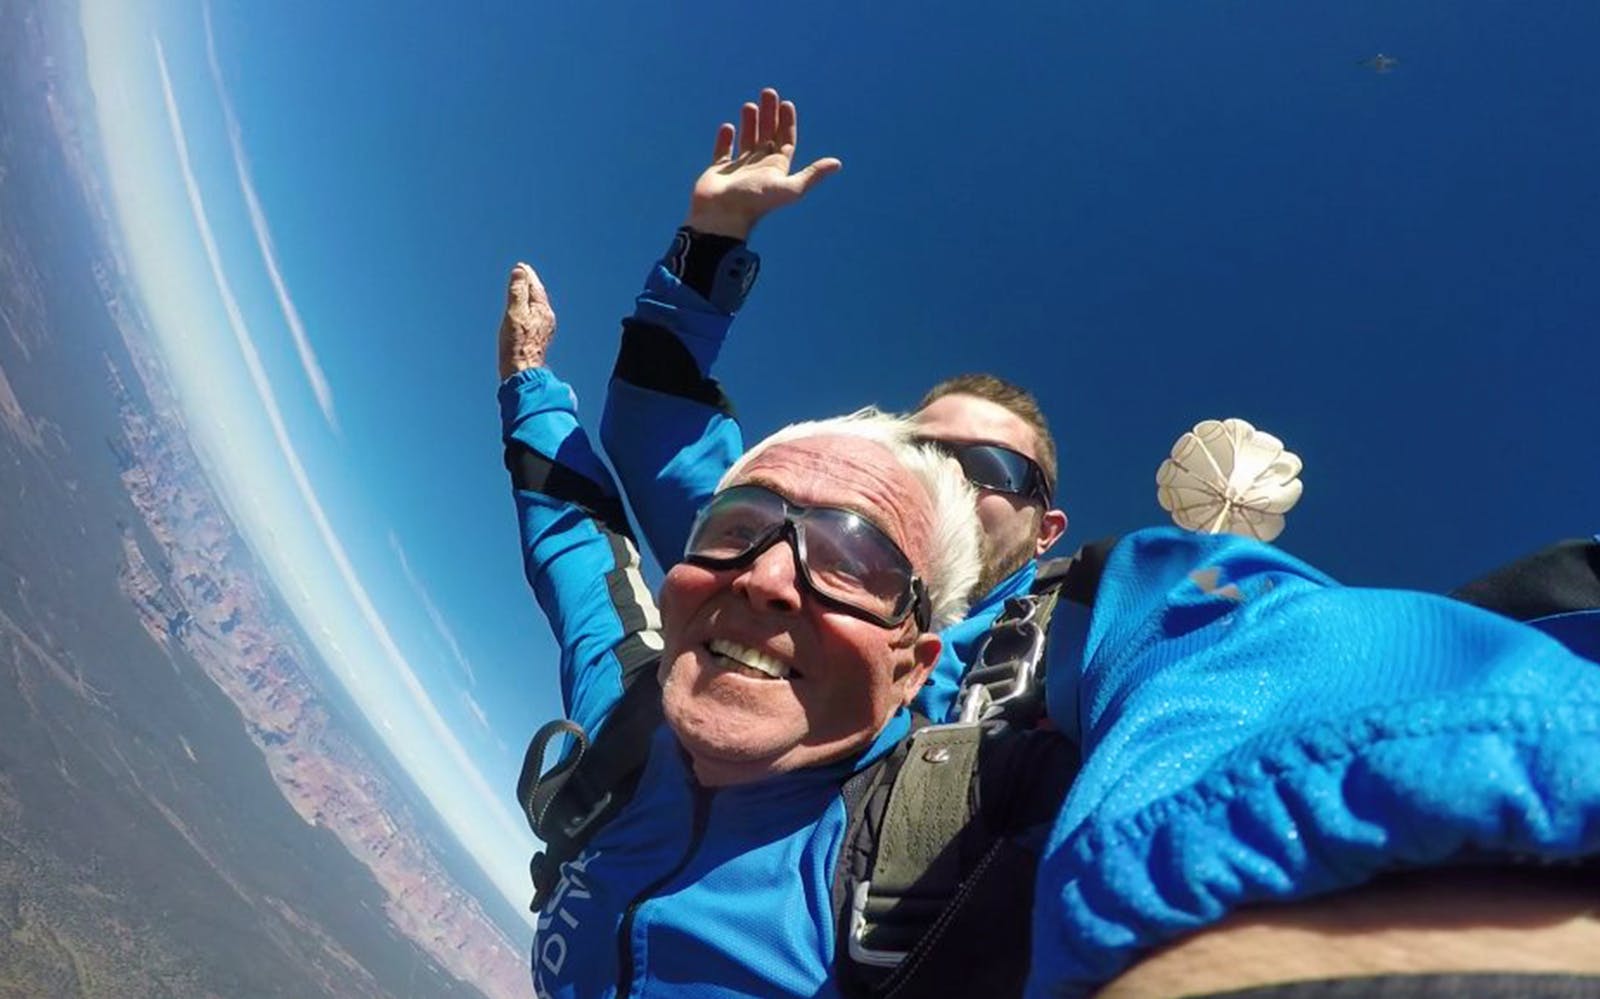 Skydiving at Grand Canyon Location, tips, tickets and more